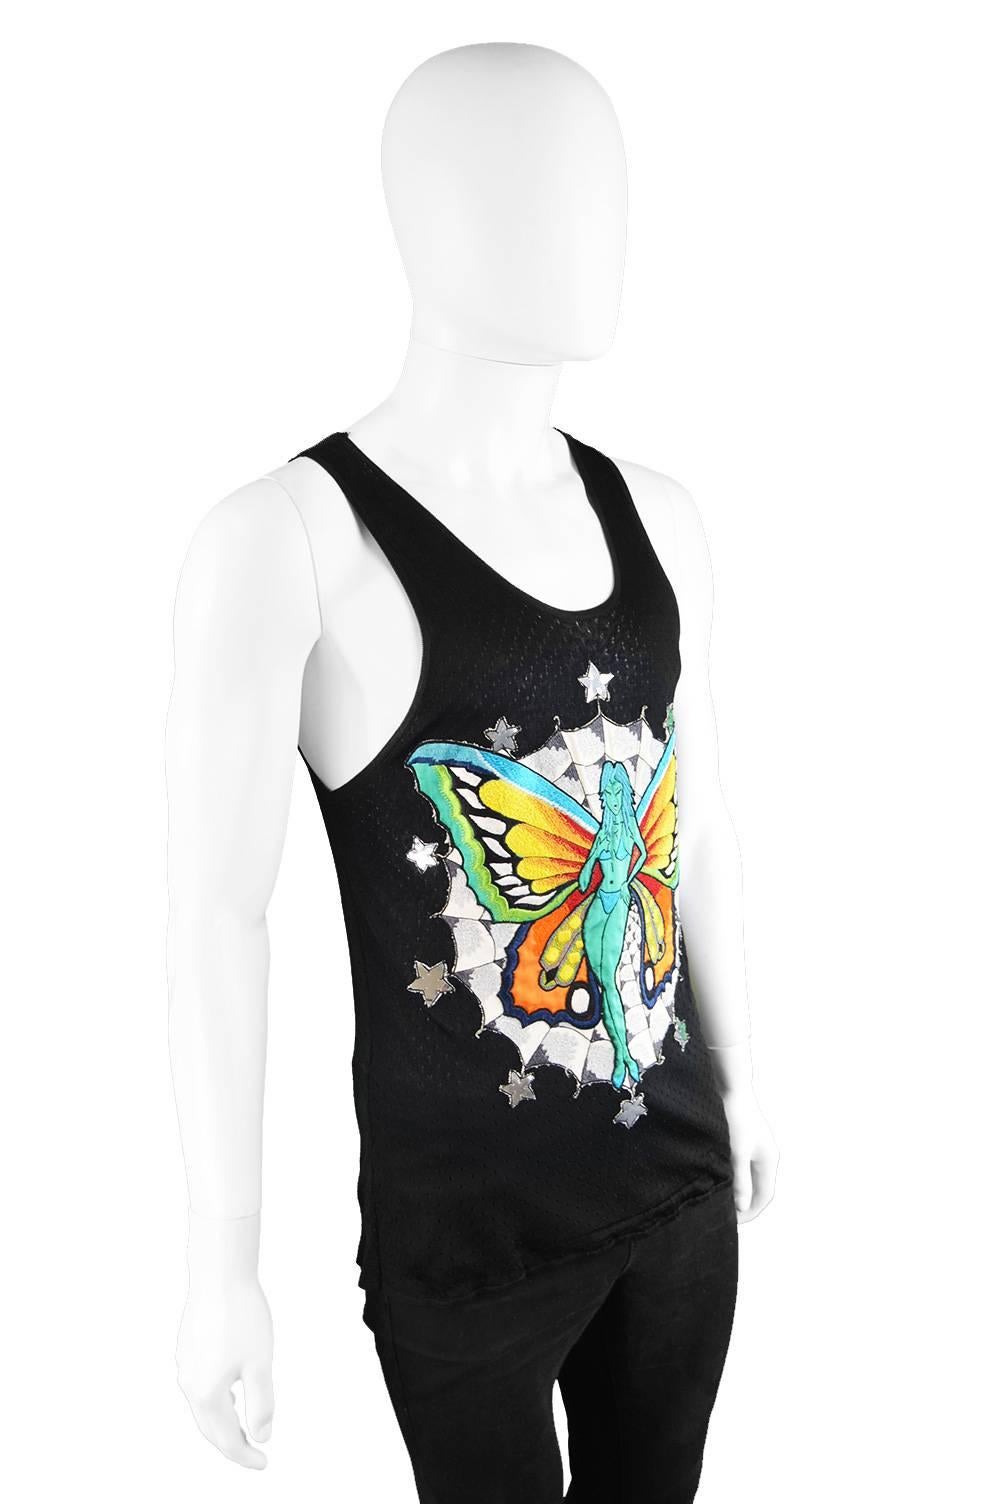 Men's Tom Ford for Gucci Mens Rayon Knit Tank Top with Embroidered Fairy, S/S 2002 